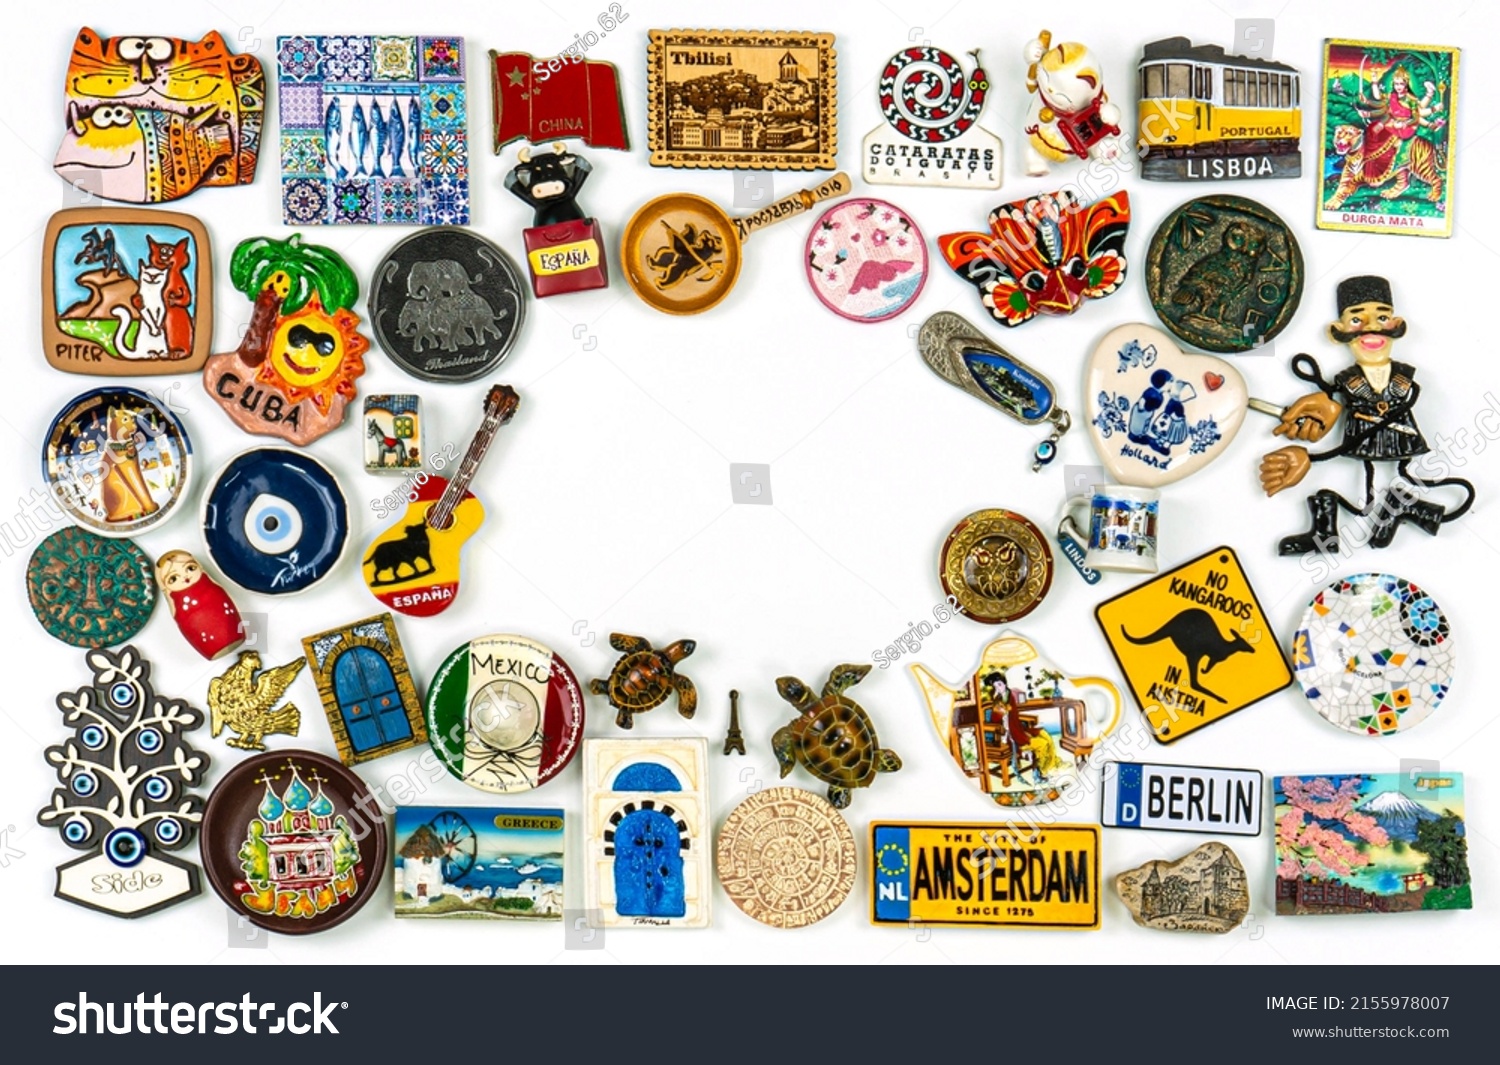 Travel souvenirs From Around The World On A White Background. Fridge magnets. Landscape orientation with window. #2155978007